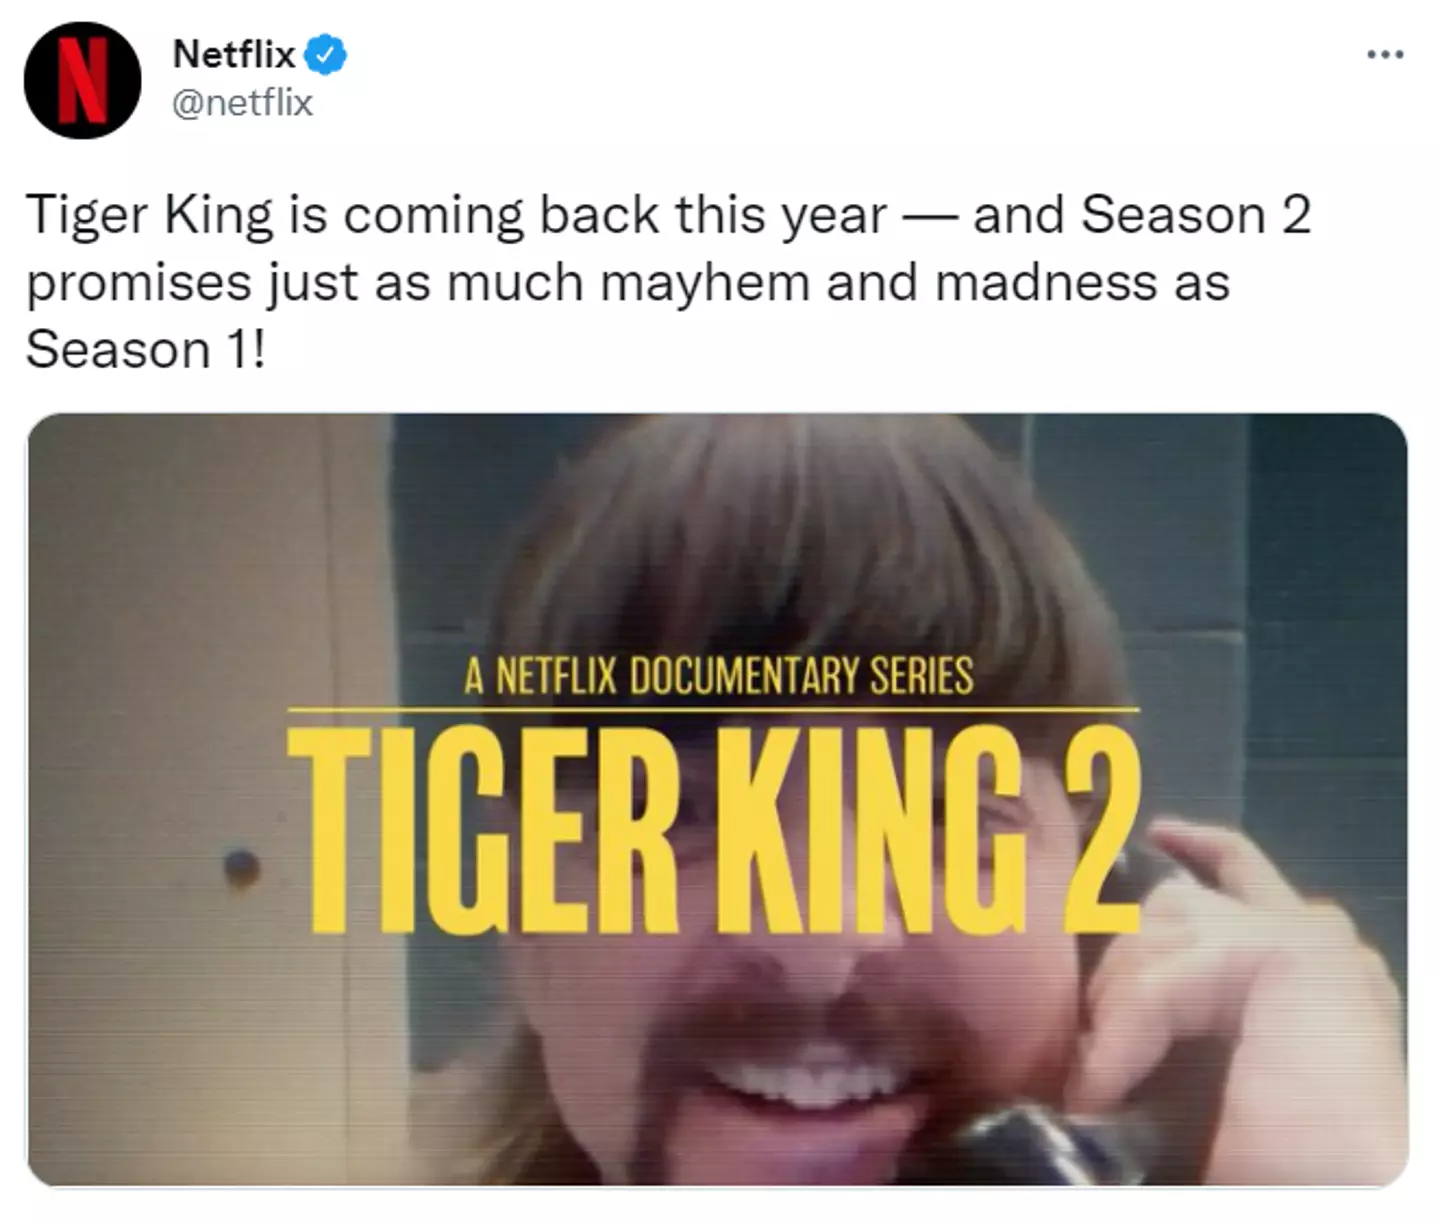 Netflix have just announced the news on their Twitter (